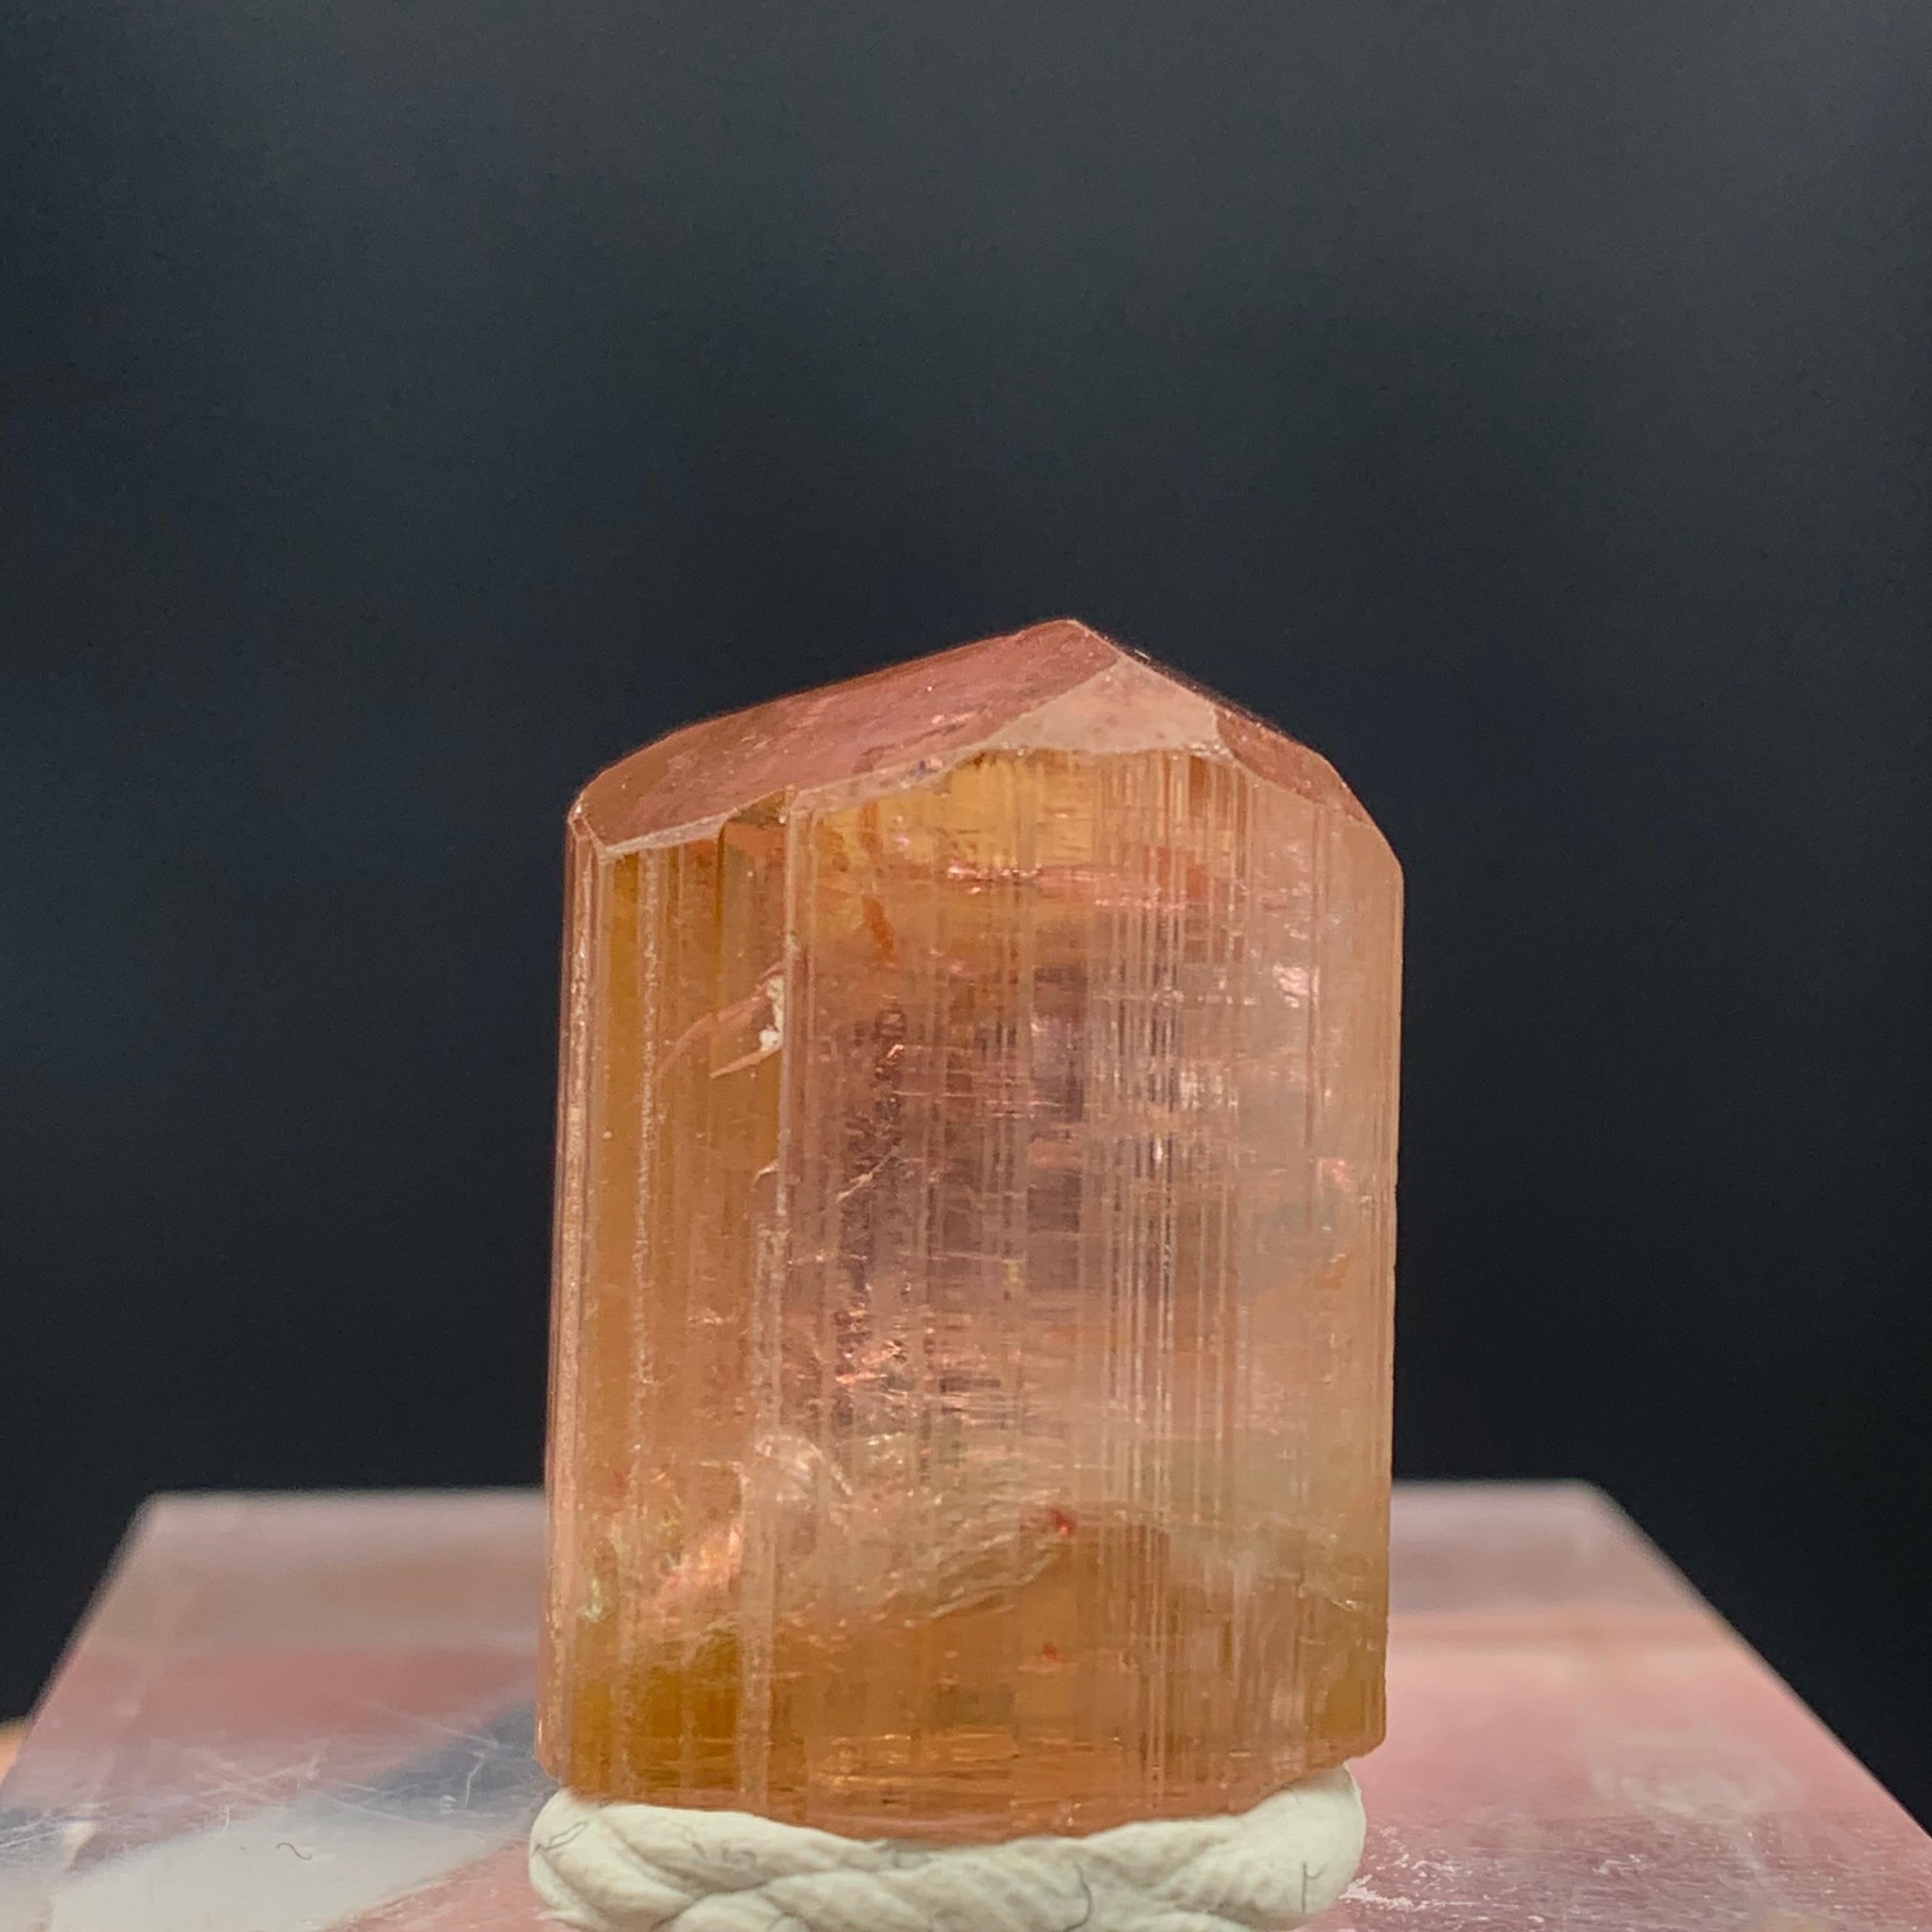 Lovely Peach Color Tourmaline Crystal From Paprook, Afghanistan
WEIGHT: 62.70 Carat
DIMENSIONS:2.3 x 1.7 x 1.5 Cm
ORIGIN: Afghanistan
COLOR: Peach 
TREATMENT: None

Tourmaline is an extremely popular gemstone; the name Tourmaline is derived